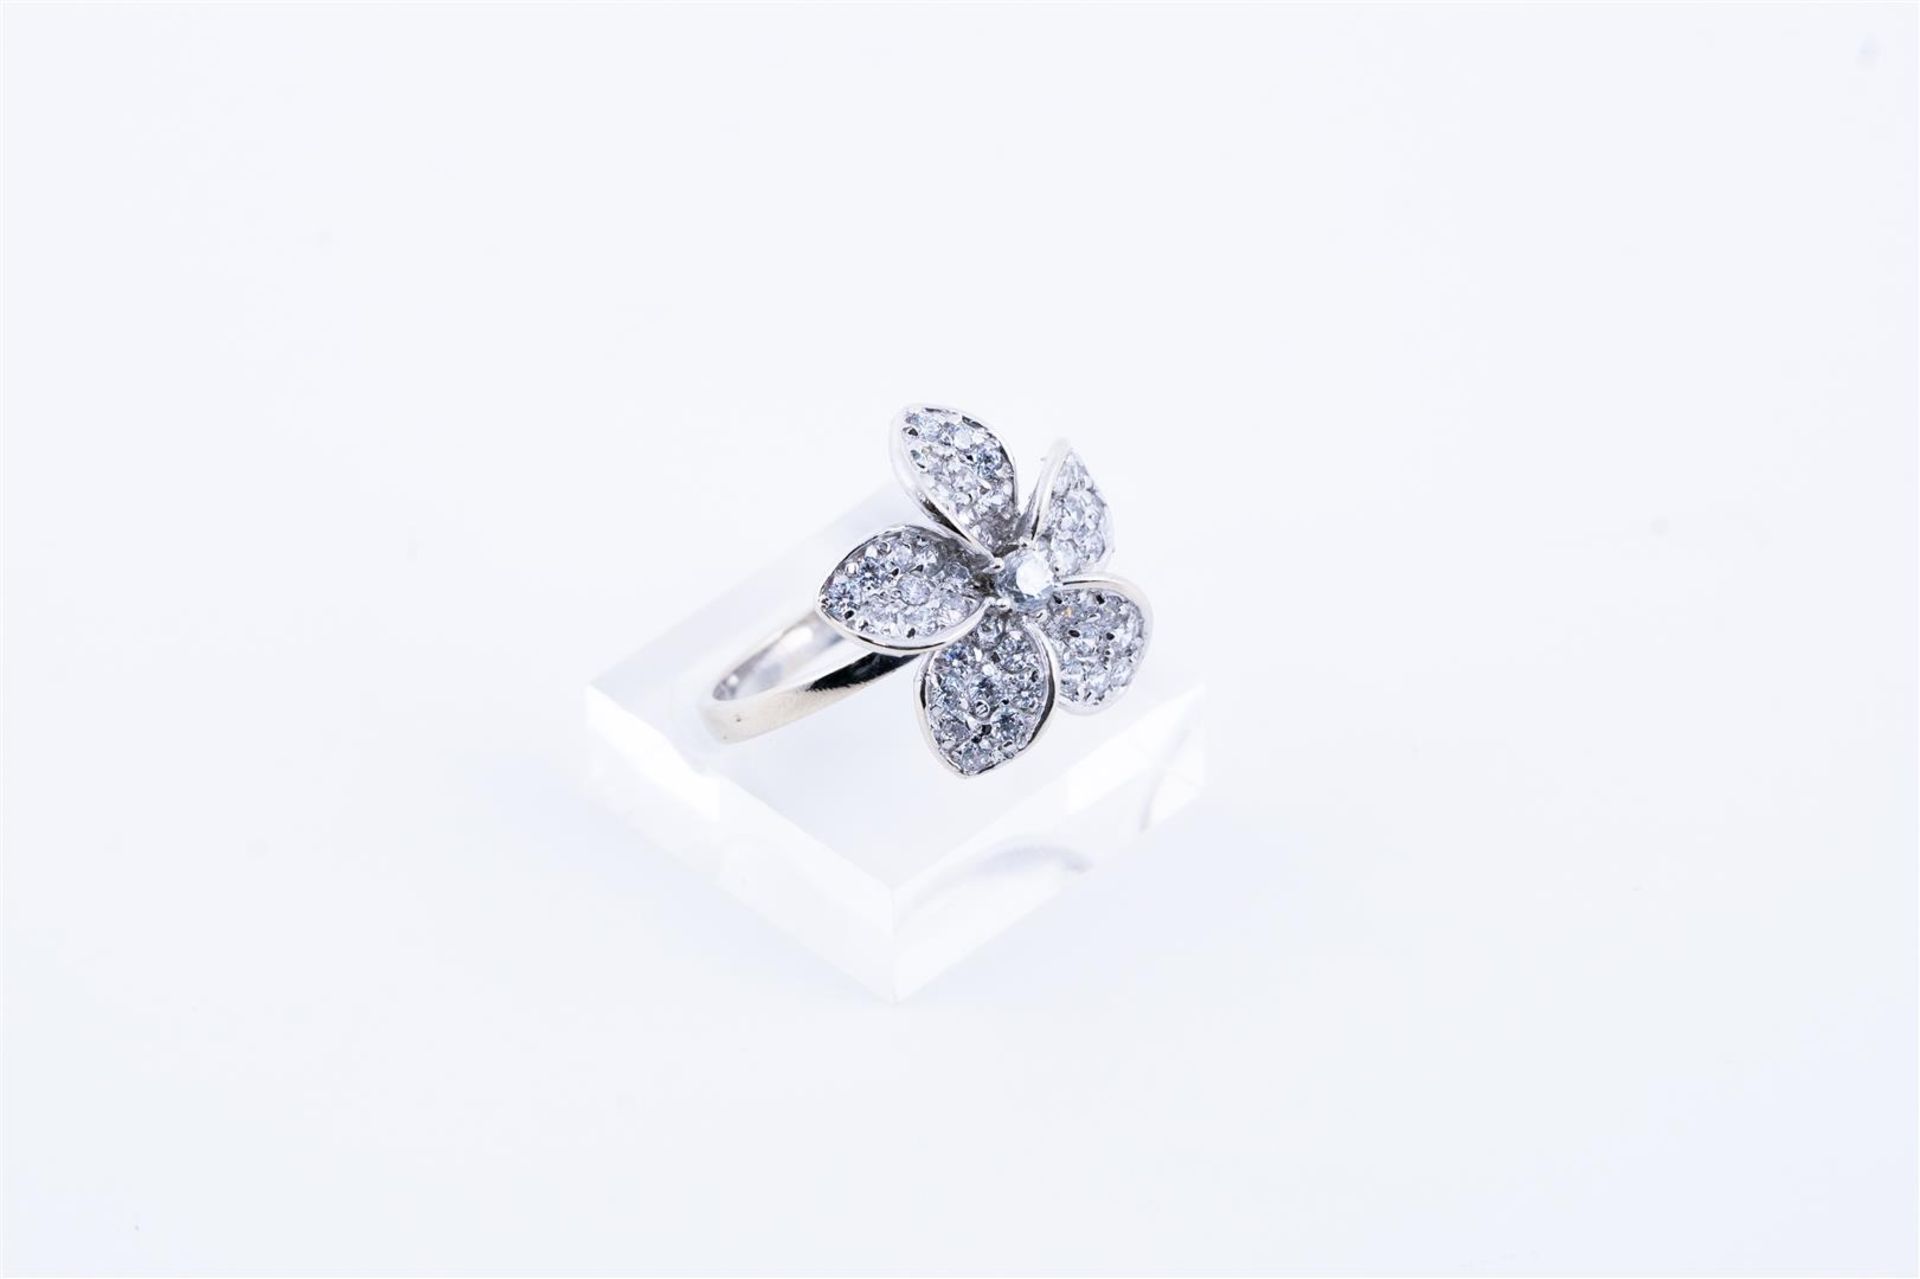 14kt white gold flower ring set with zirconia.
The ring is set with approximately 46 brilliant cut z